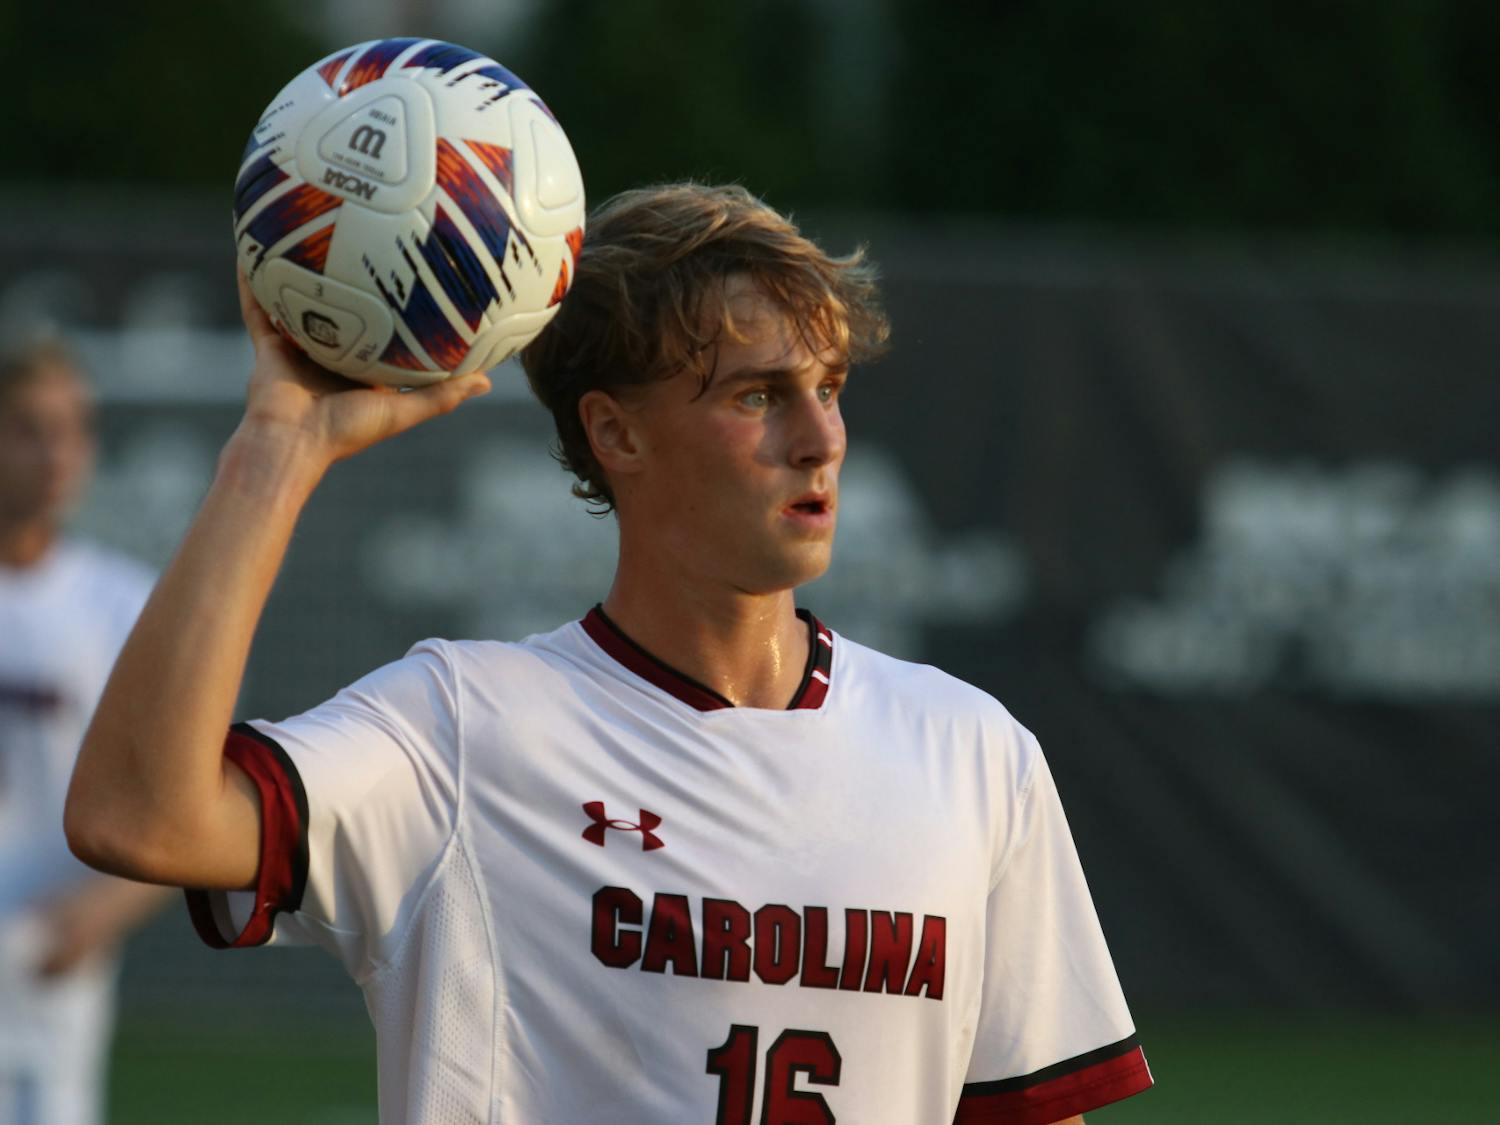 Freshman Christiano Bruletti looking for an open teammate during the South Carolina's match versus Clemson on Sep. 2, 2022.